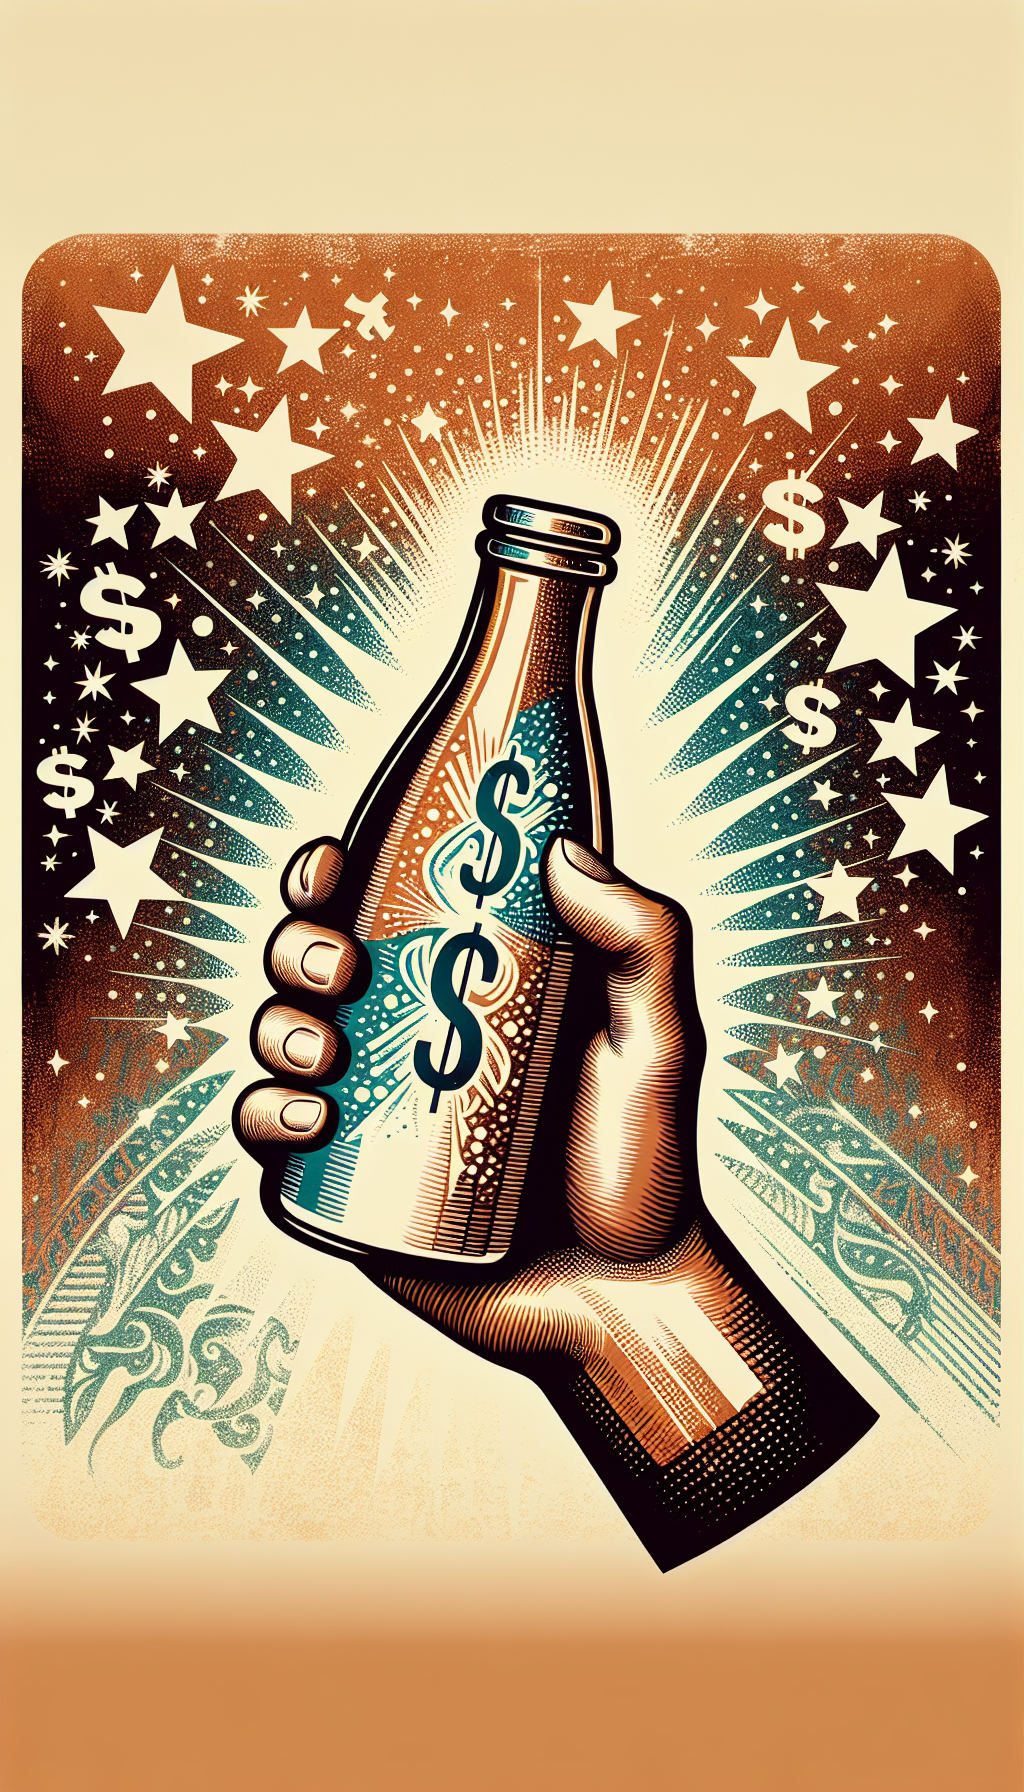 An illustration showcases an elegant hand holding a vintage milk bottle aloft as if clinking glasses in a toast. The bottle is surrounded by twinkling stars and a transparent overlay of ascending dollar signs, symbolizing its rarity and value. The style transitions from sepia tones at the bottom—portraying historical significance—to vibrant colors at the top, indicating the bottle's cherished status in modern collecting.